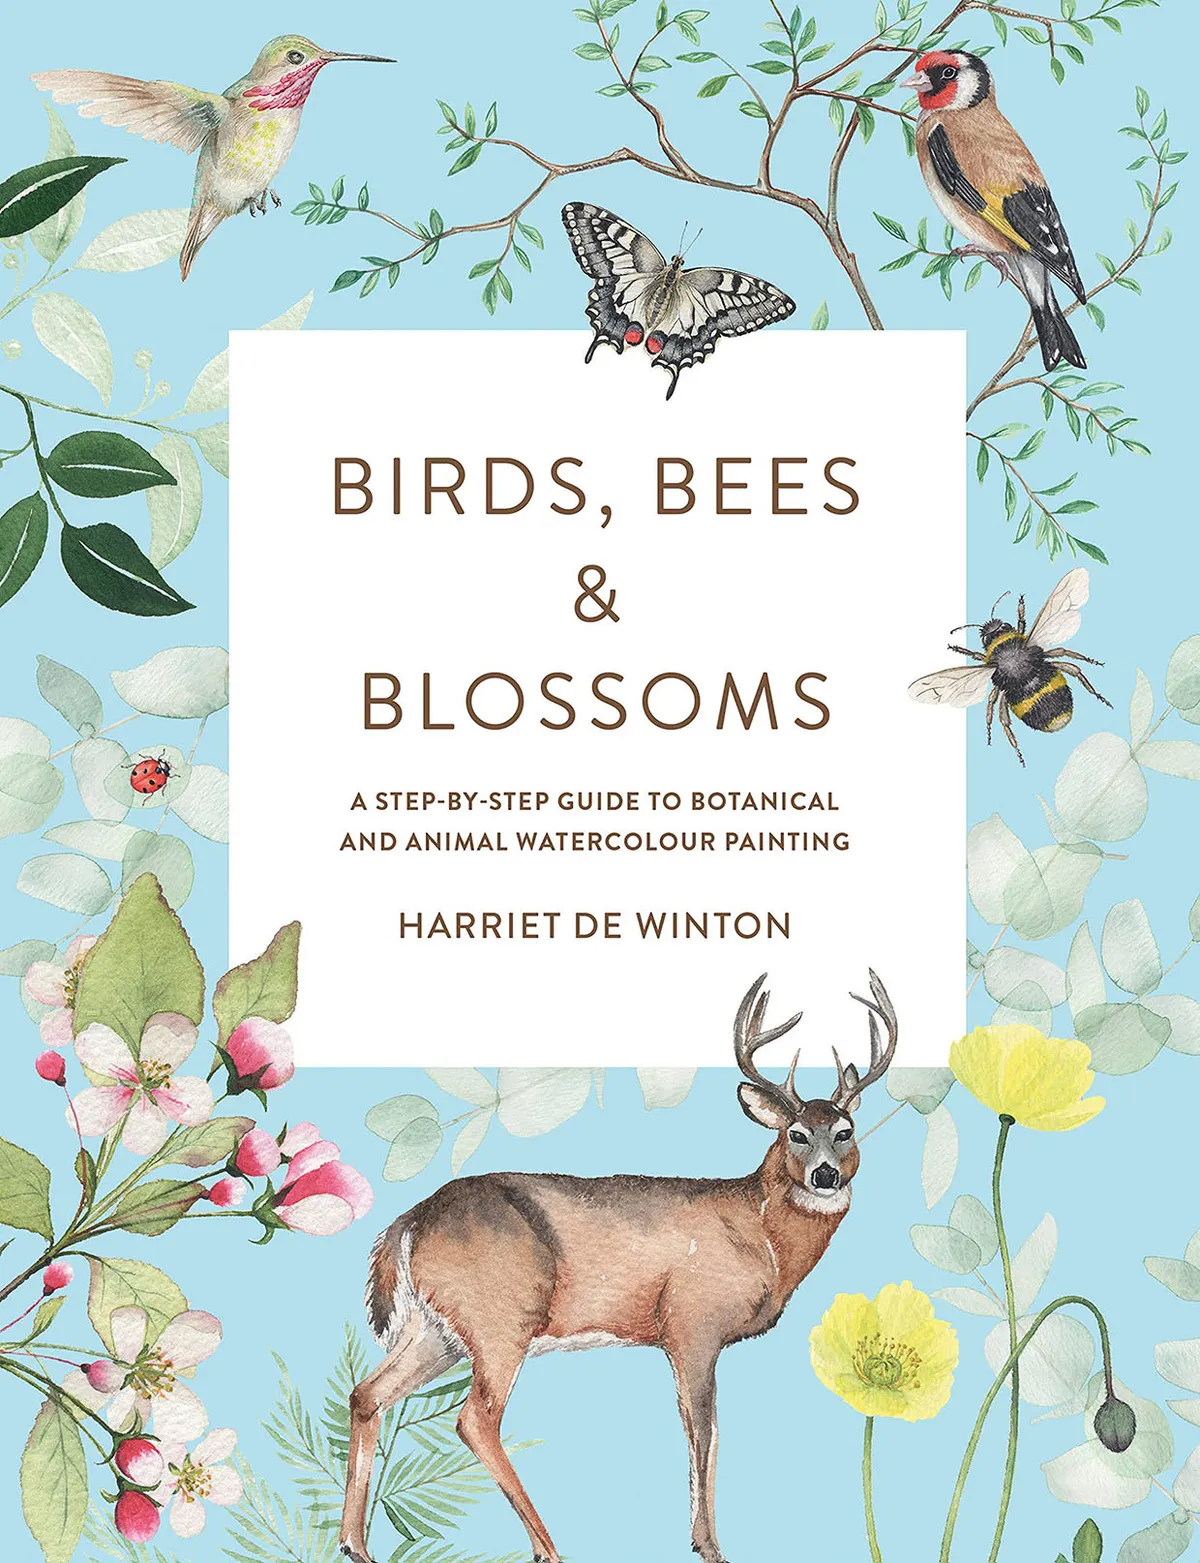 Birds, Bees and Blossoms by Harriet de Winton